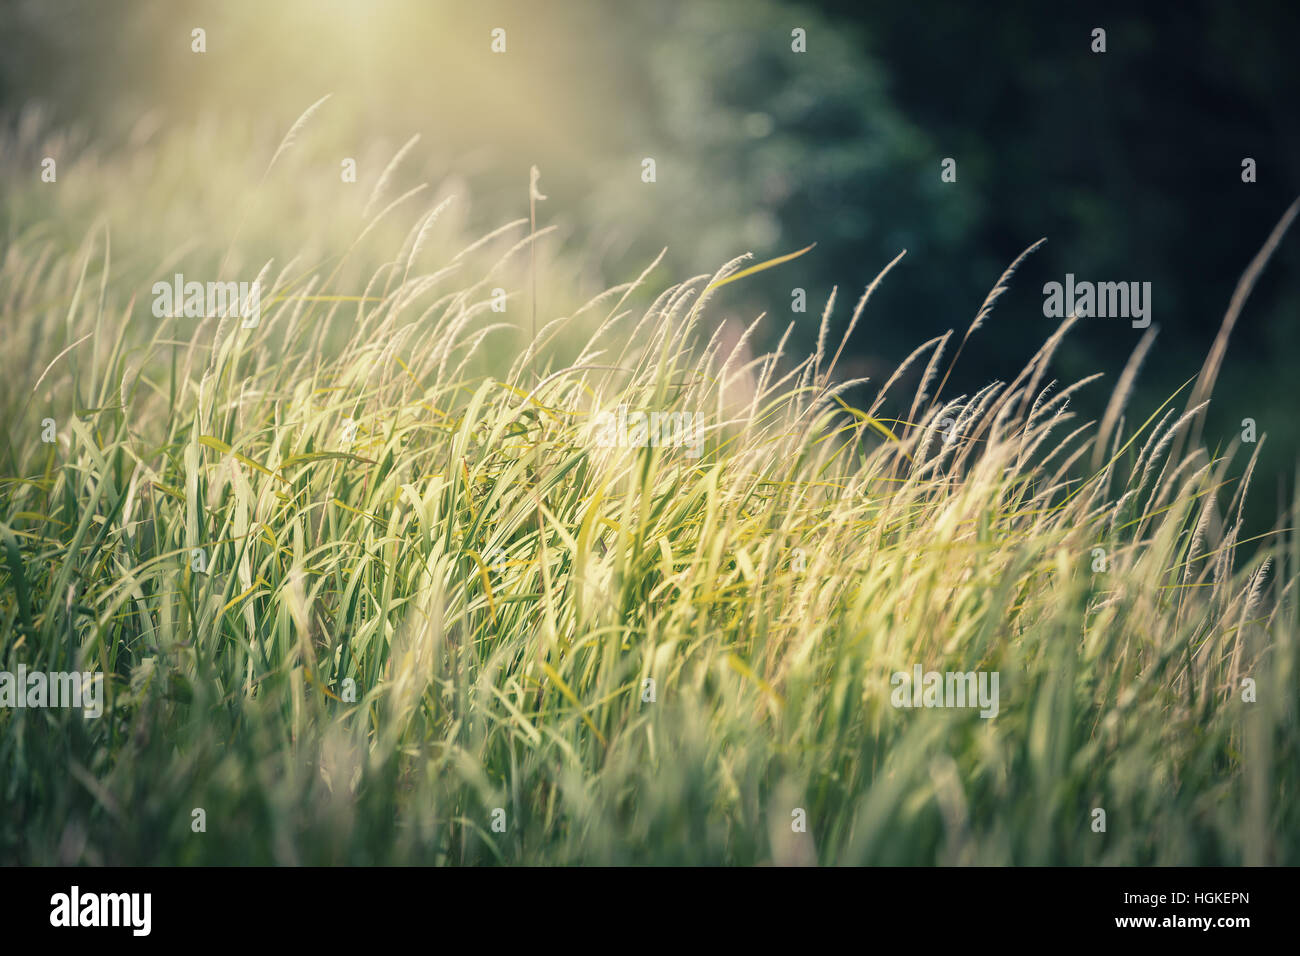 Close focus on blowing green grass with warm yellow sunlight on top Stock Photo